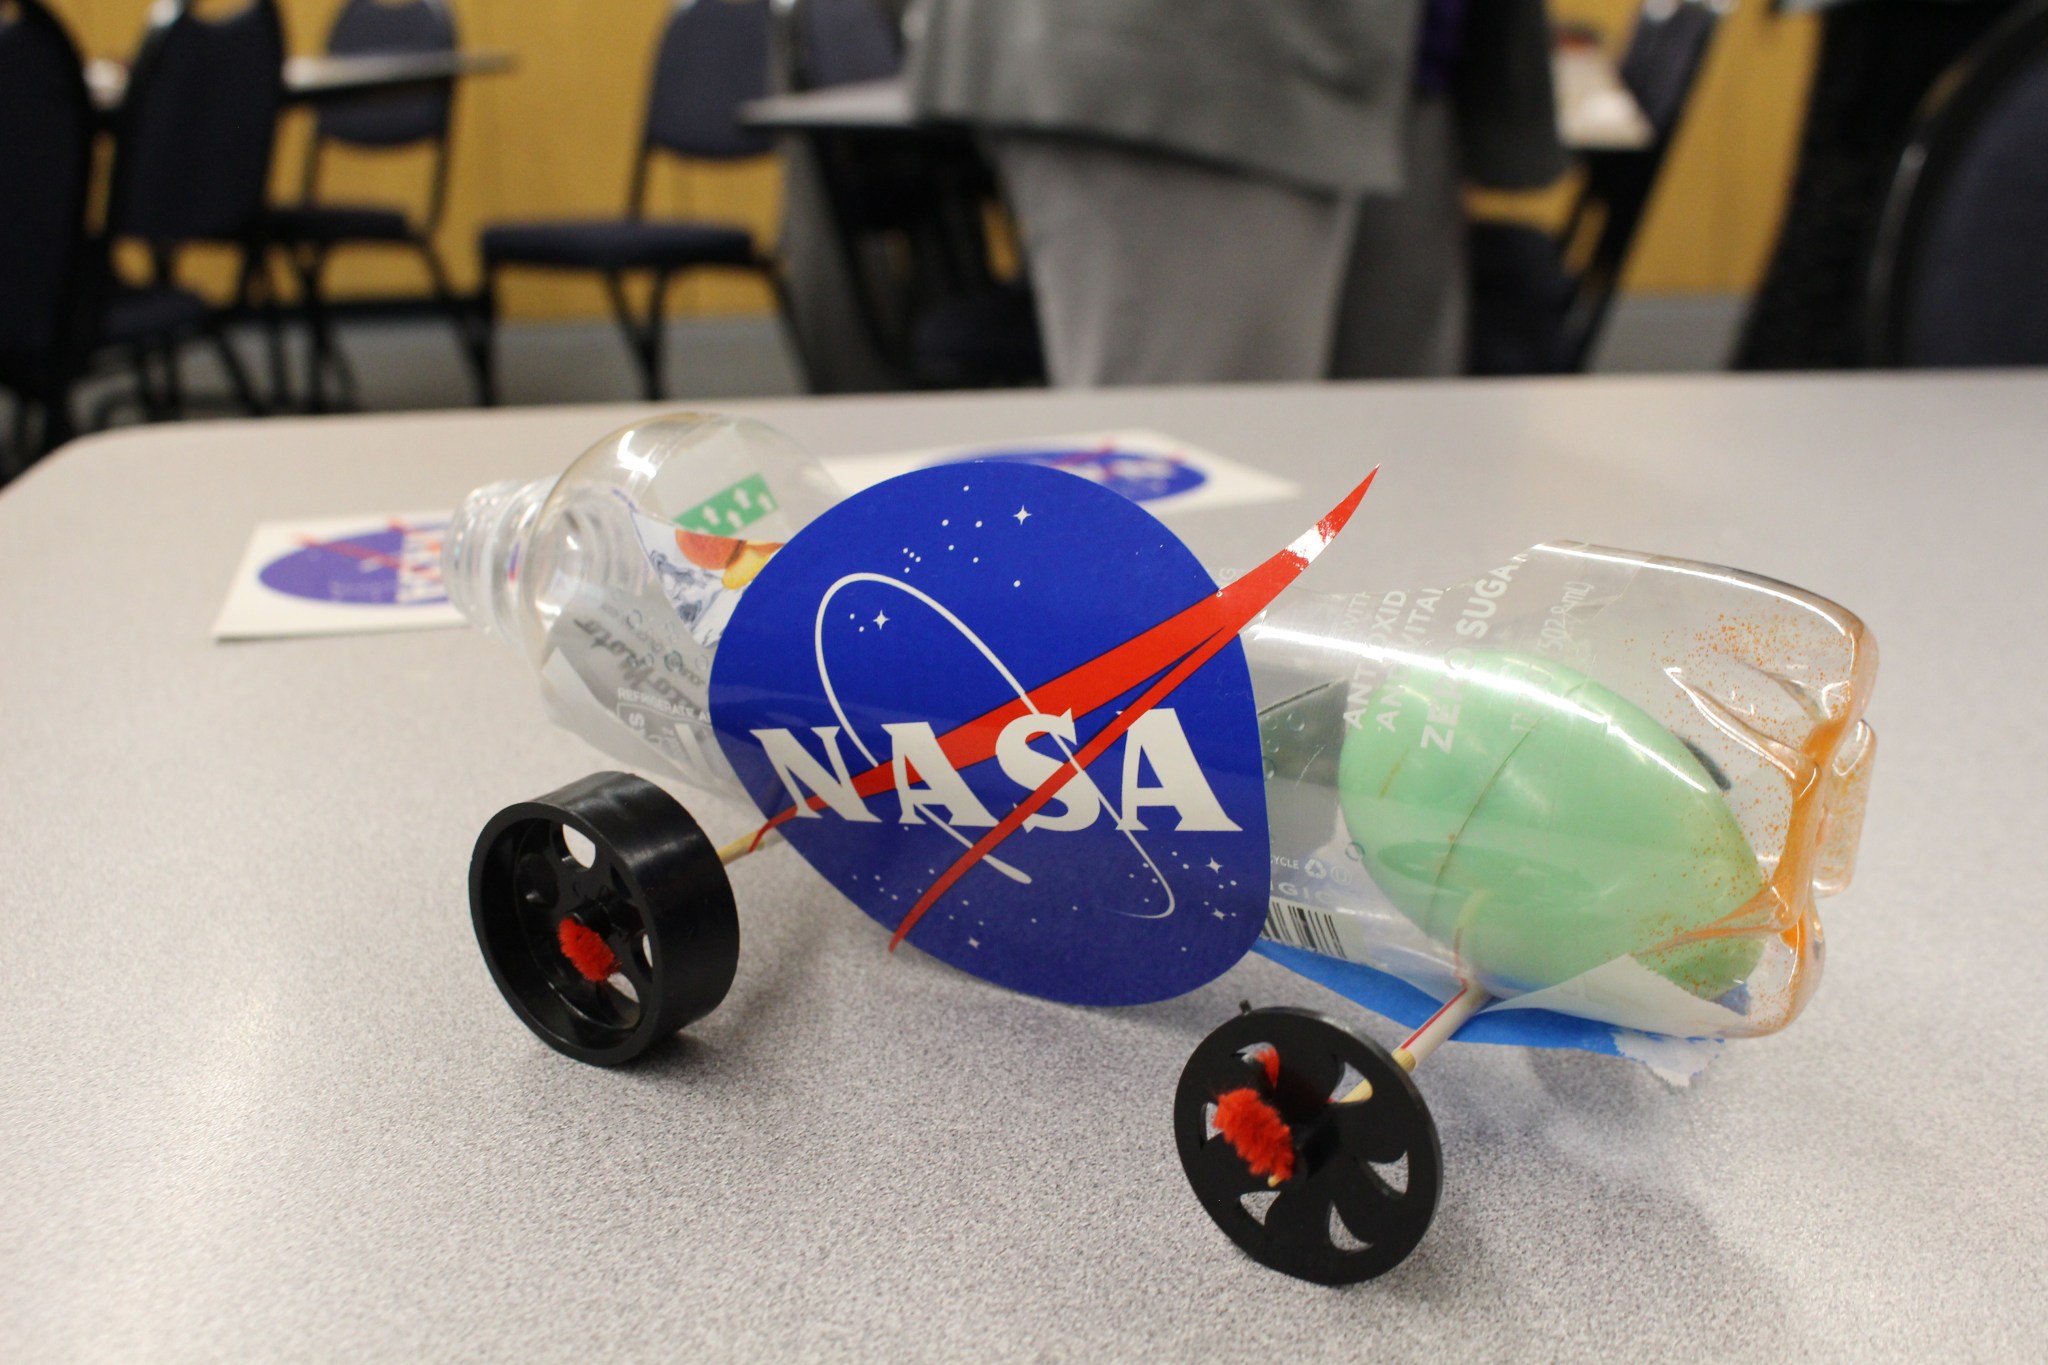 A group of educators built a lunar buggy and determined the best slope of ramp for the rover to travel the farthest distance.